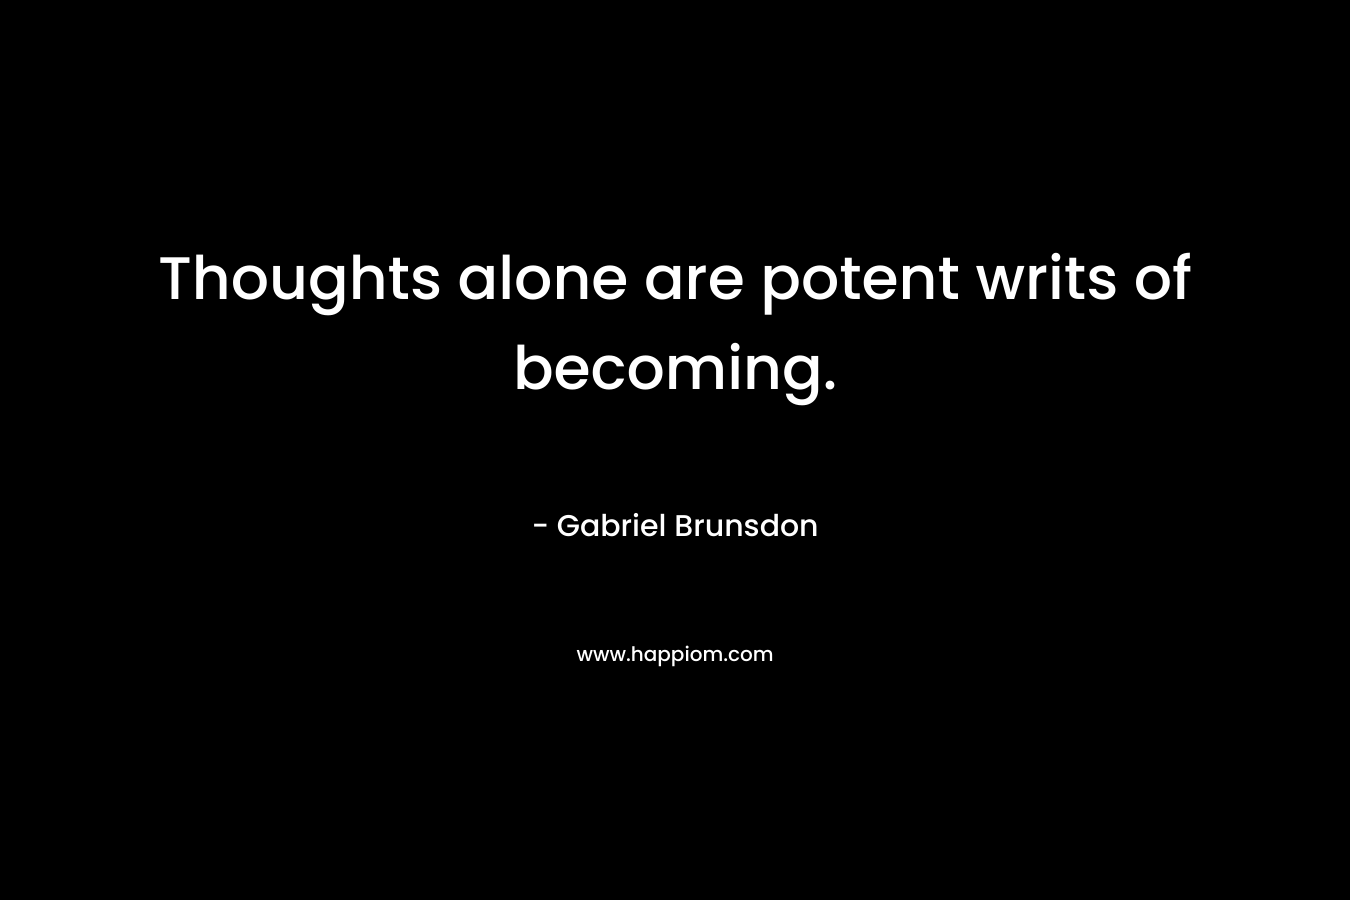 Thoughts alone are potent writs of becoming. – Gabriel Brunsdon